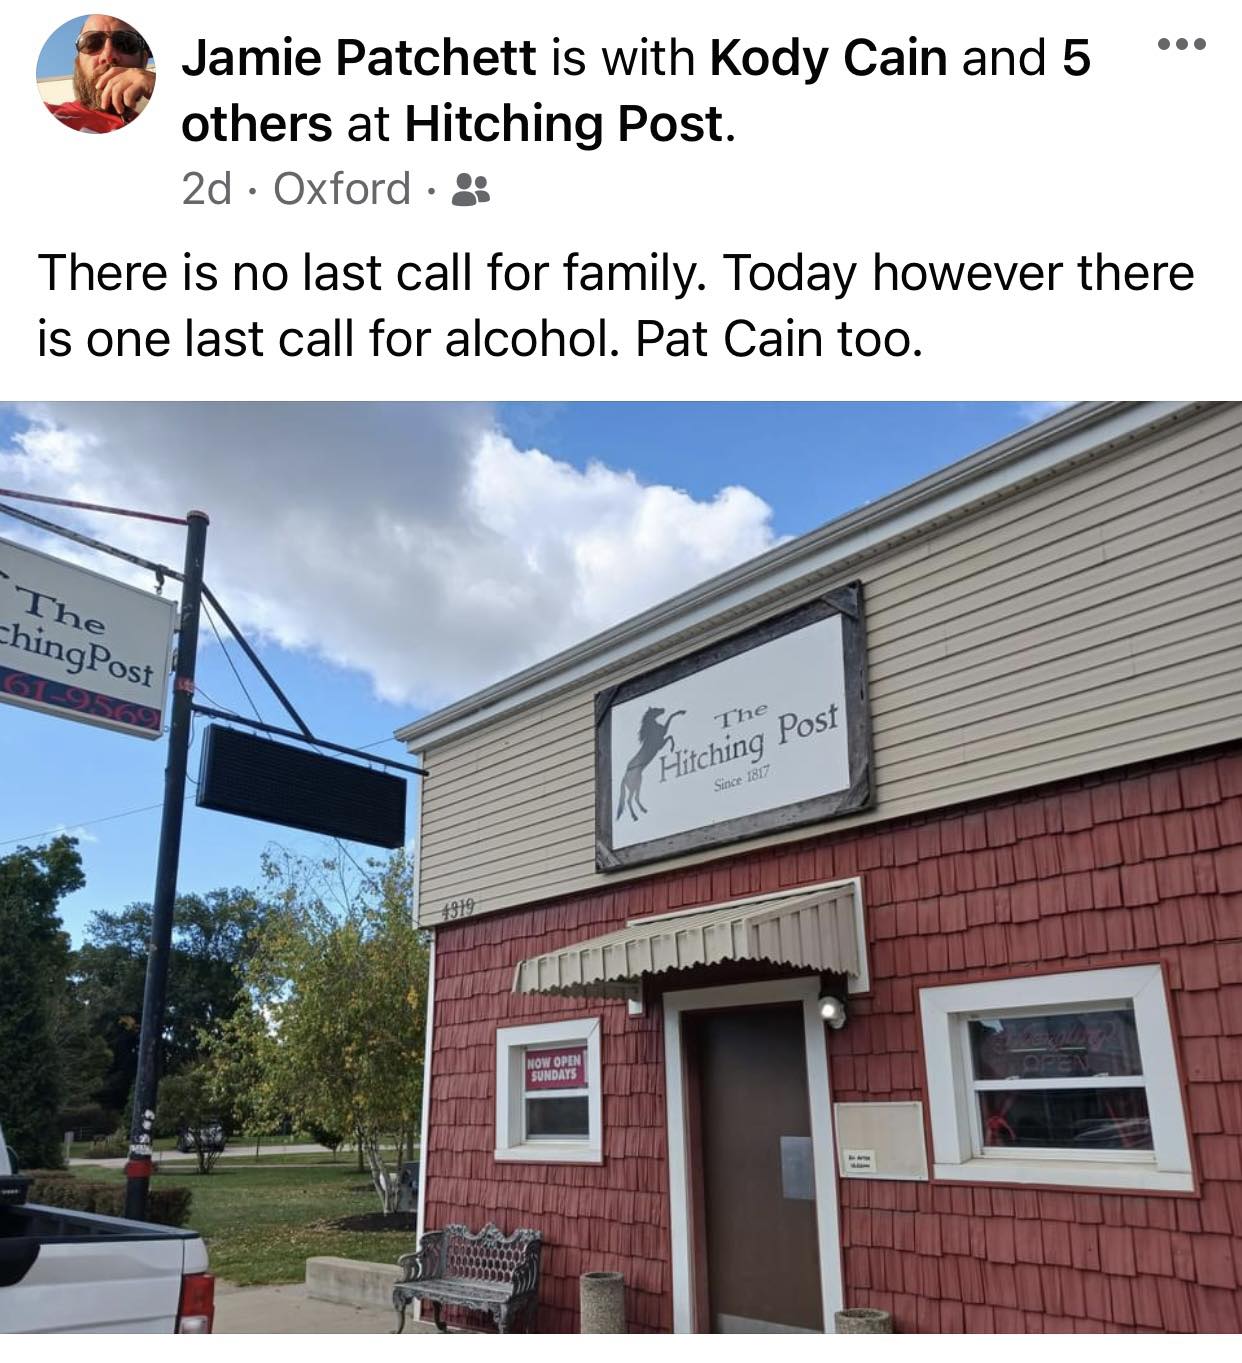 The Hitching Post Saloon